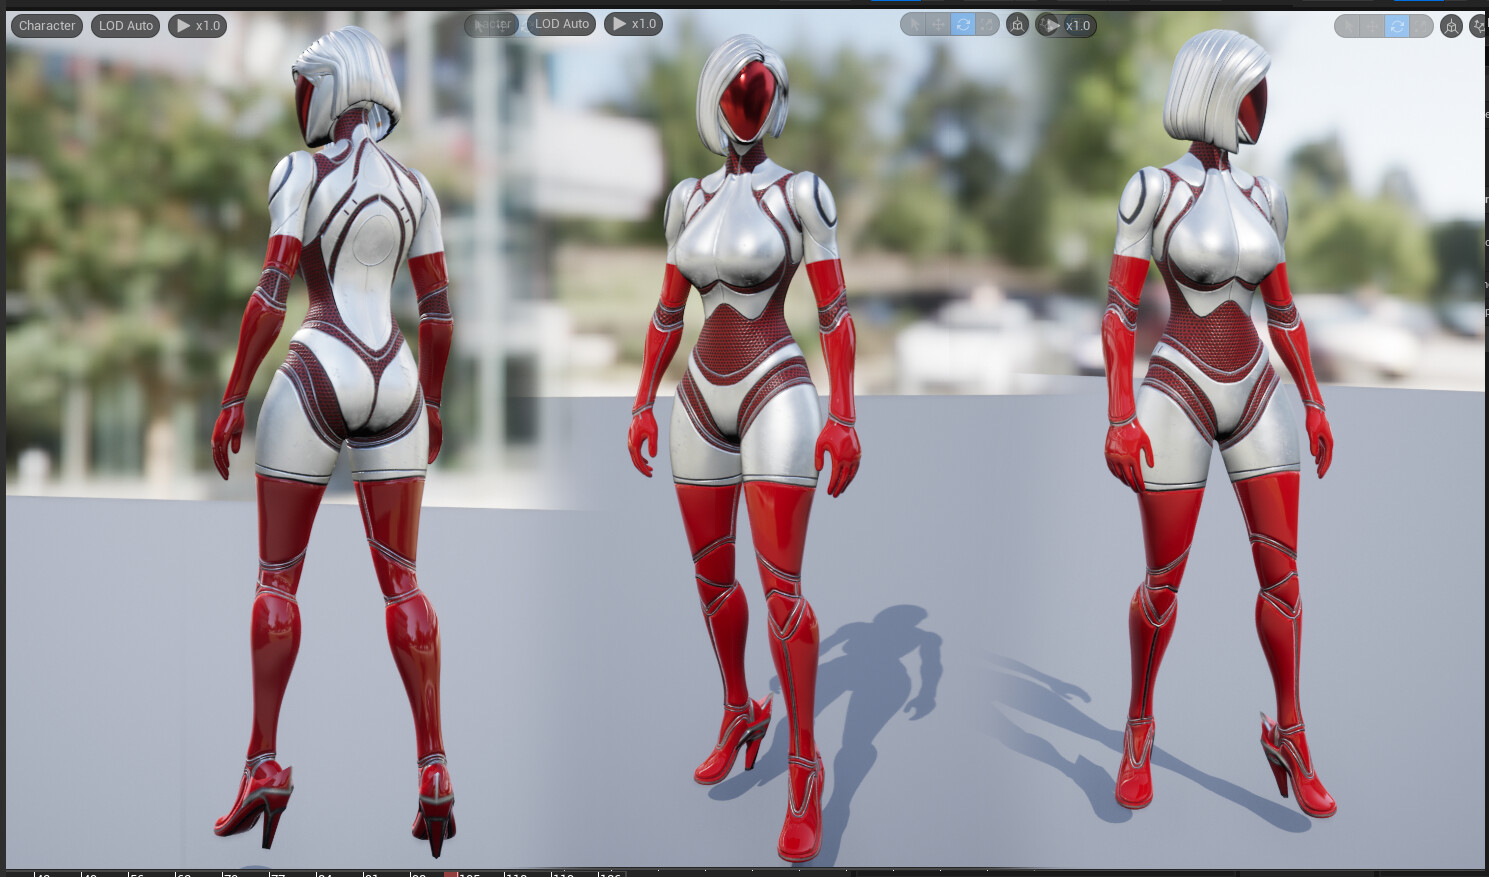 How to add Unreal breast physics to your characters. Using UE4, CC3. Works  for breasts and butts 